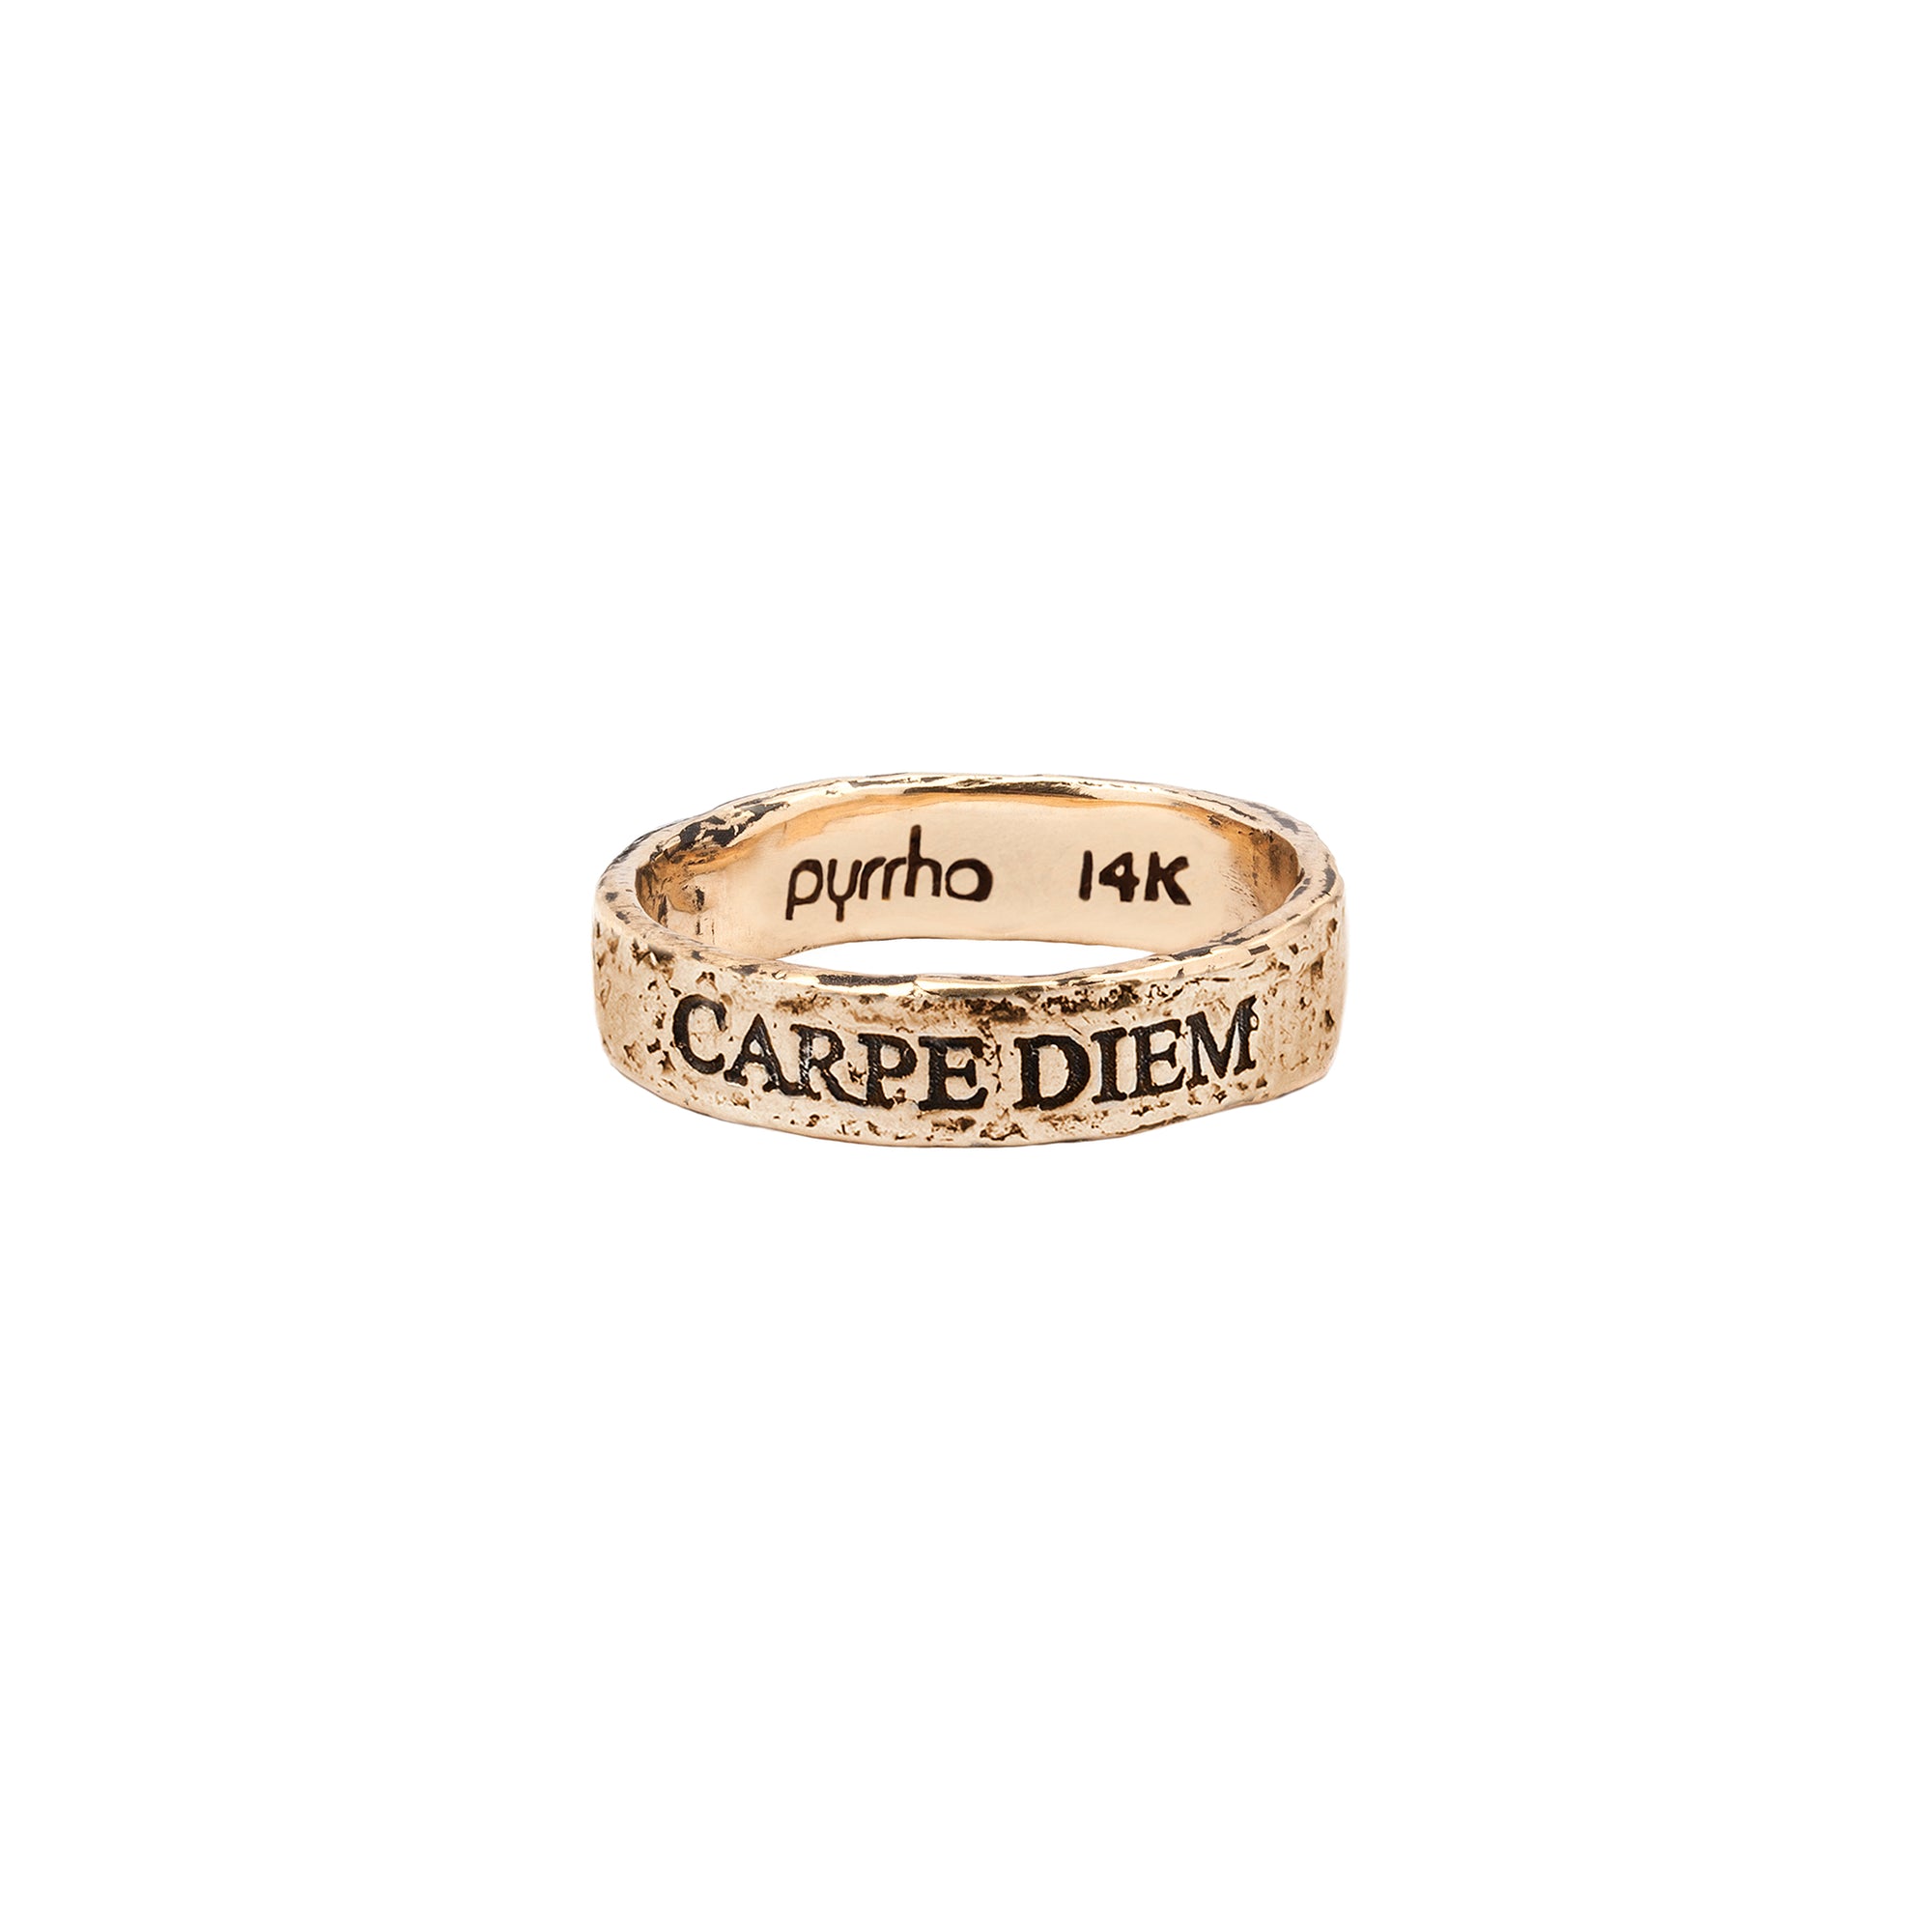 A 14k gold ring engraved with our Carpe Diem motto.